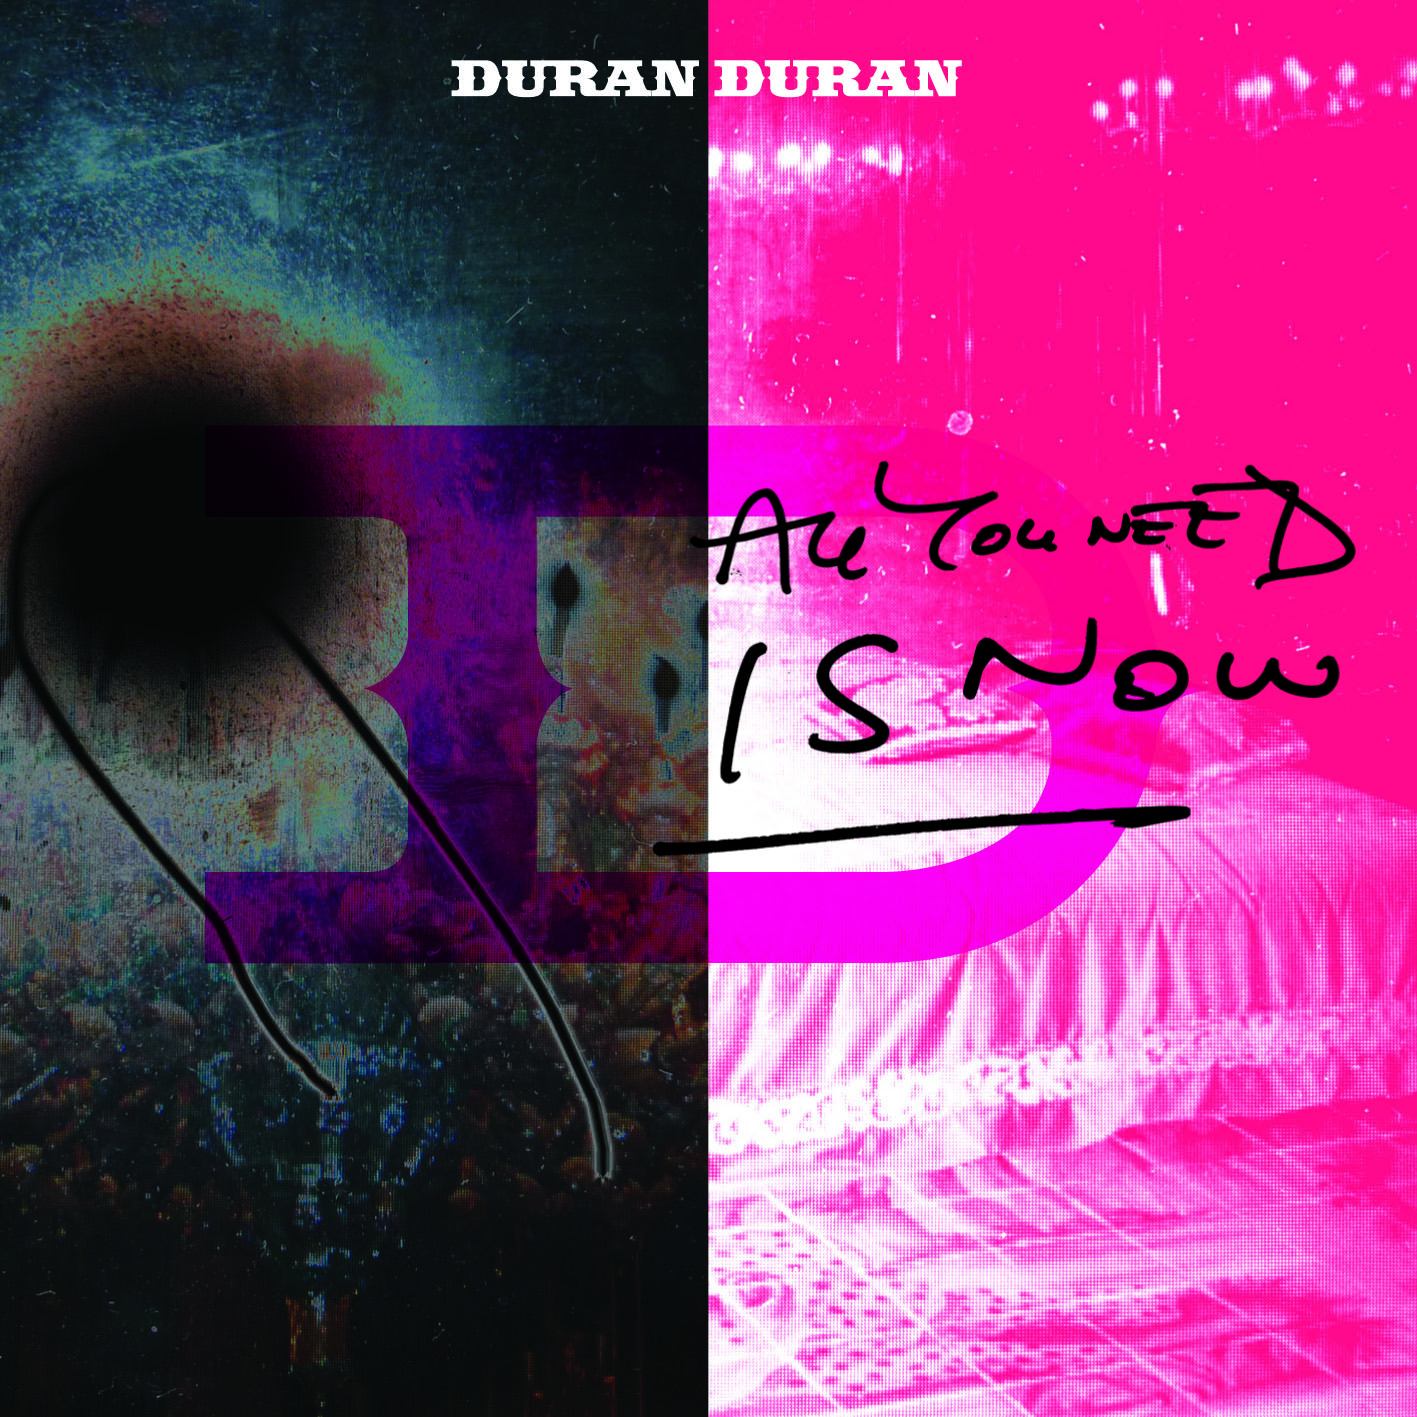 All You Need Is Now by Duran Duran on Amazon Music